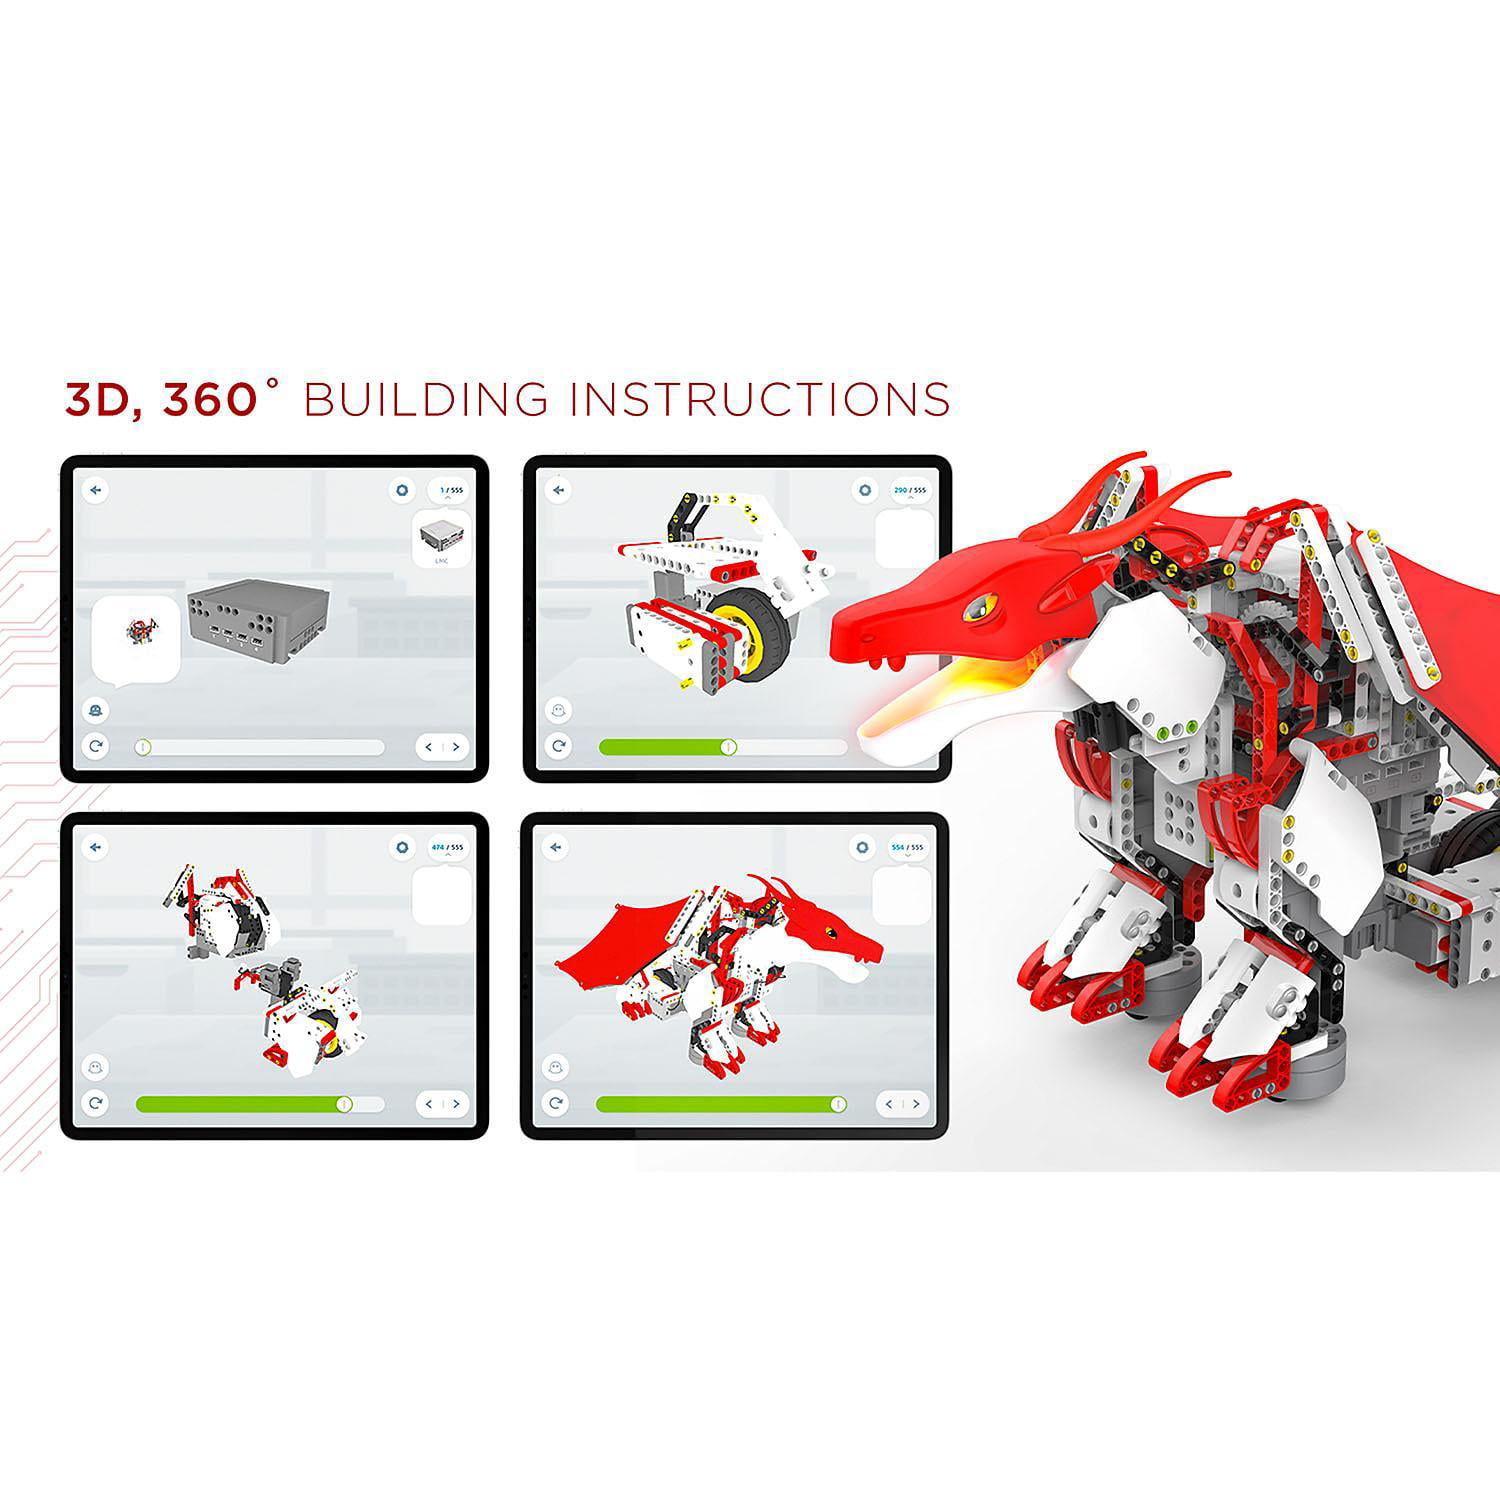 JRA0601 for sale online UBTECH JIMU Robot Mythical Series Red Building Kit 